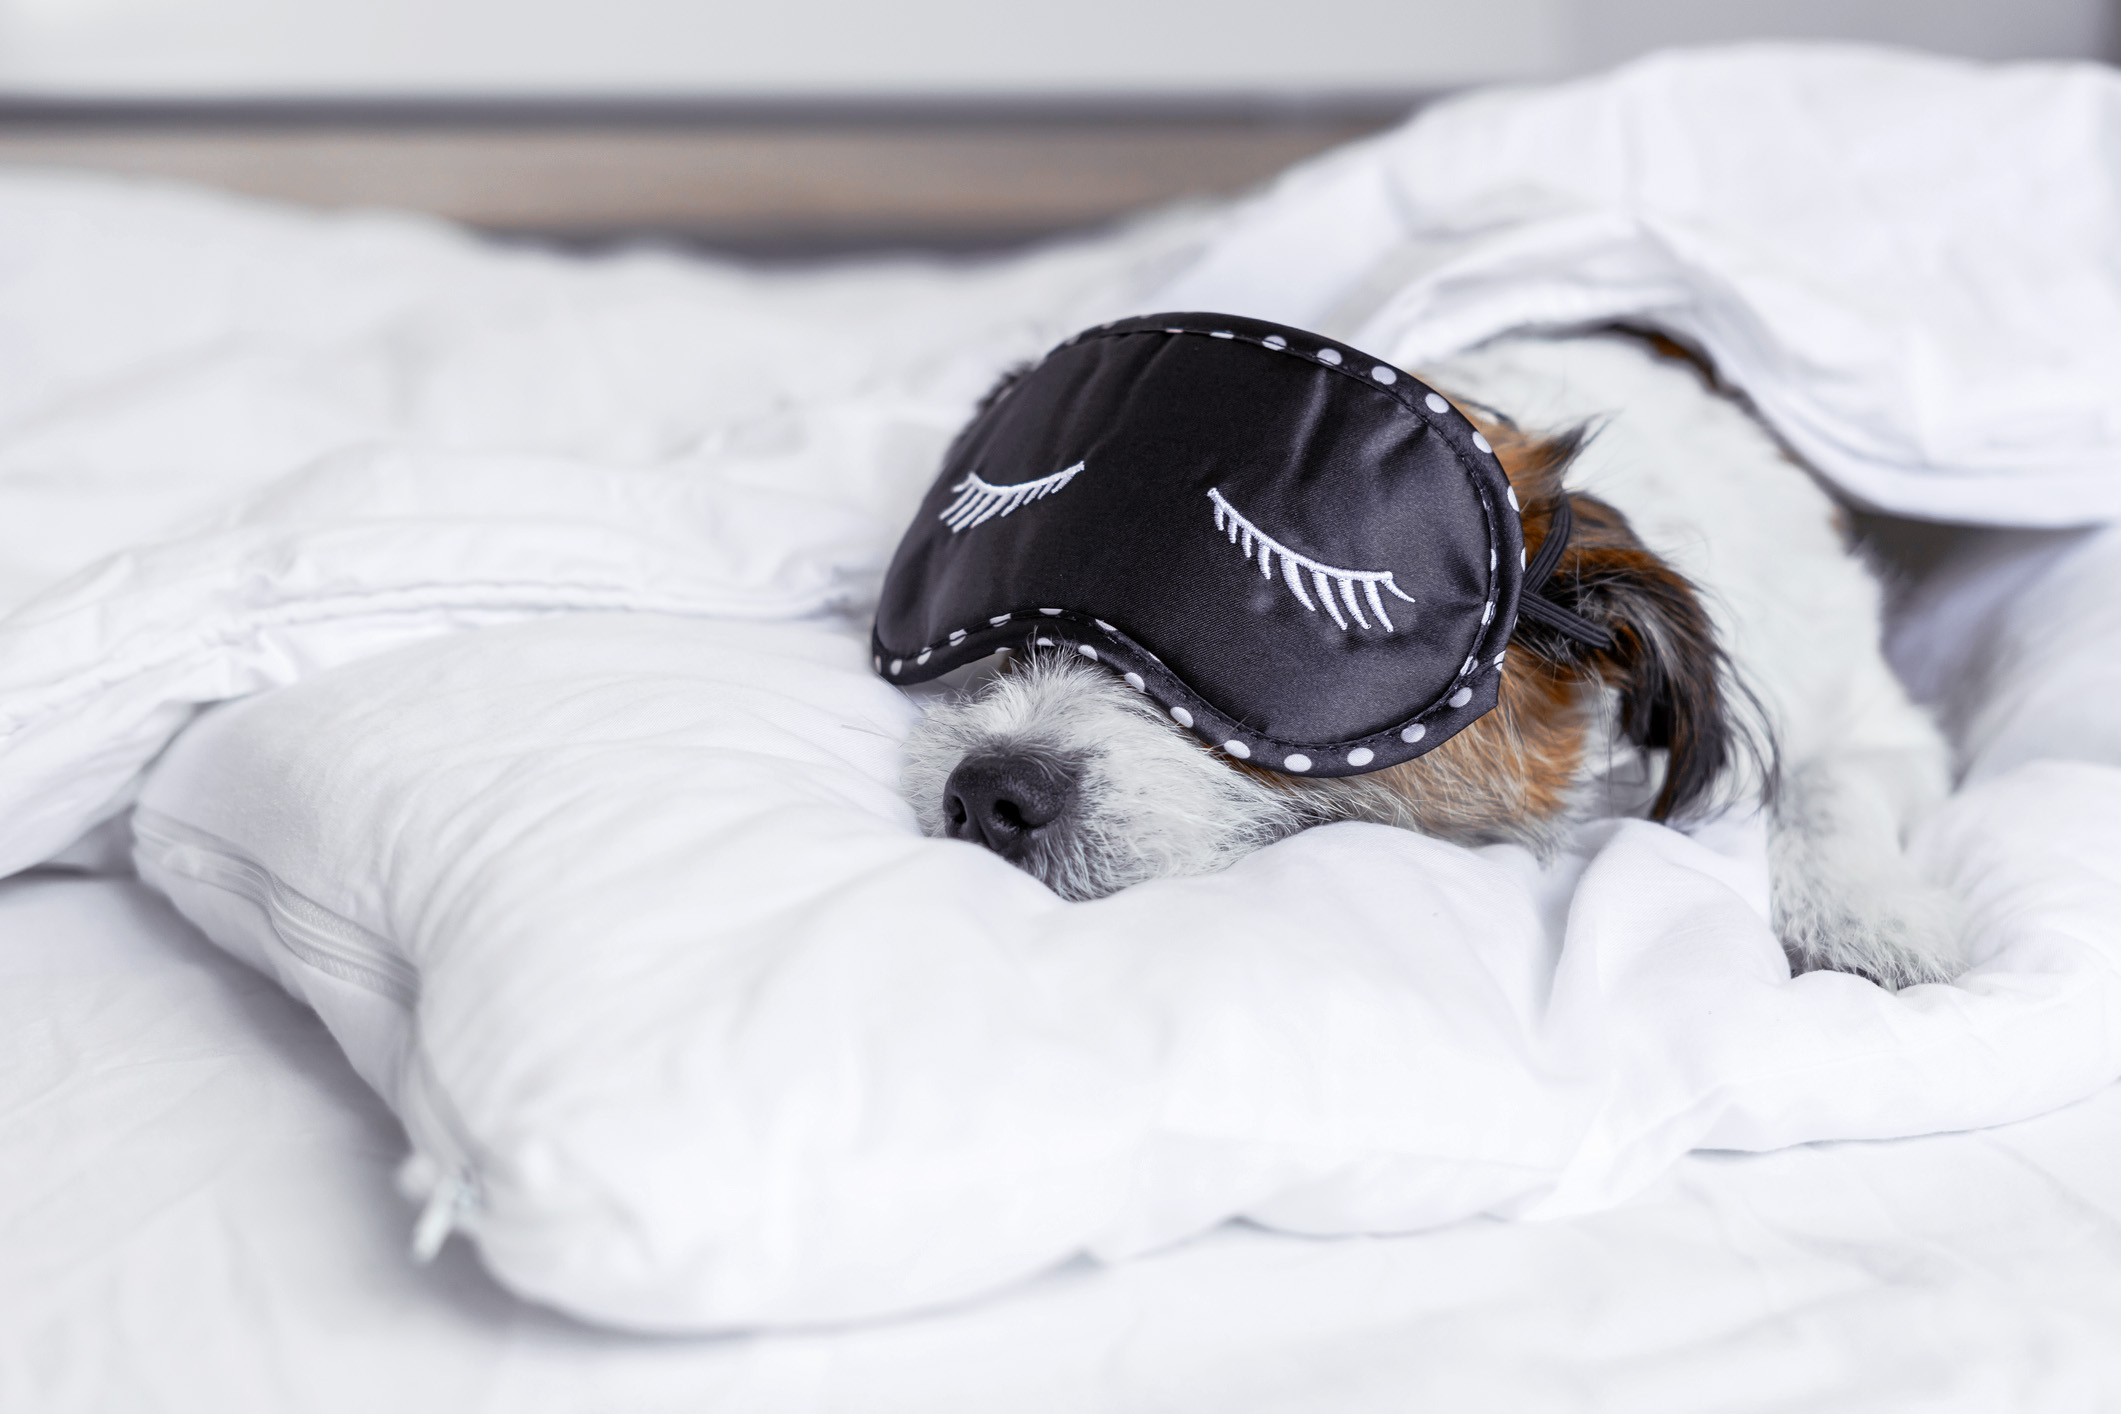 Dog in bed with sleeping mask